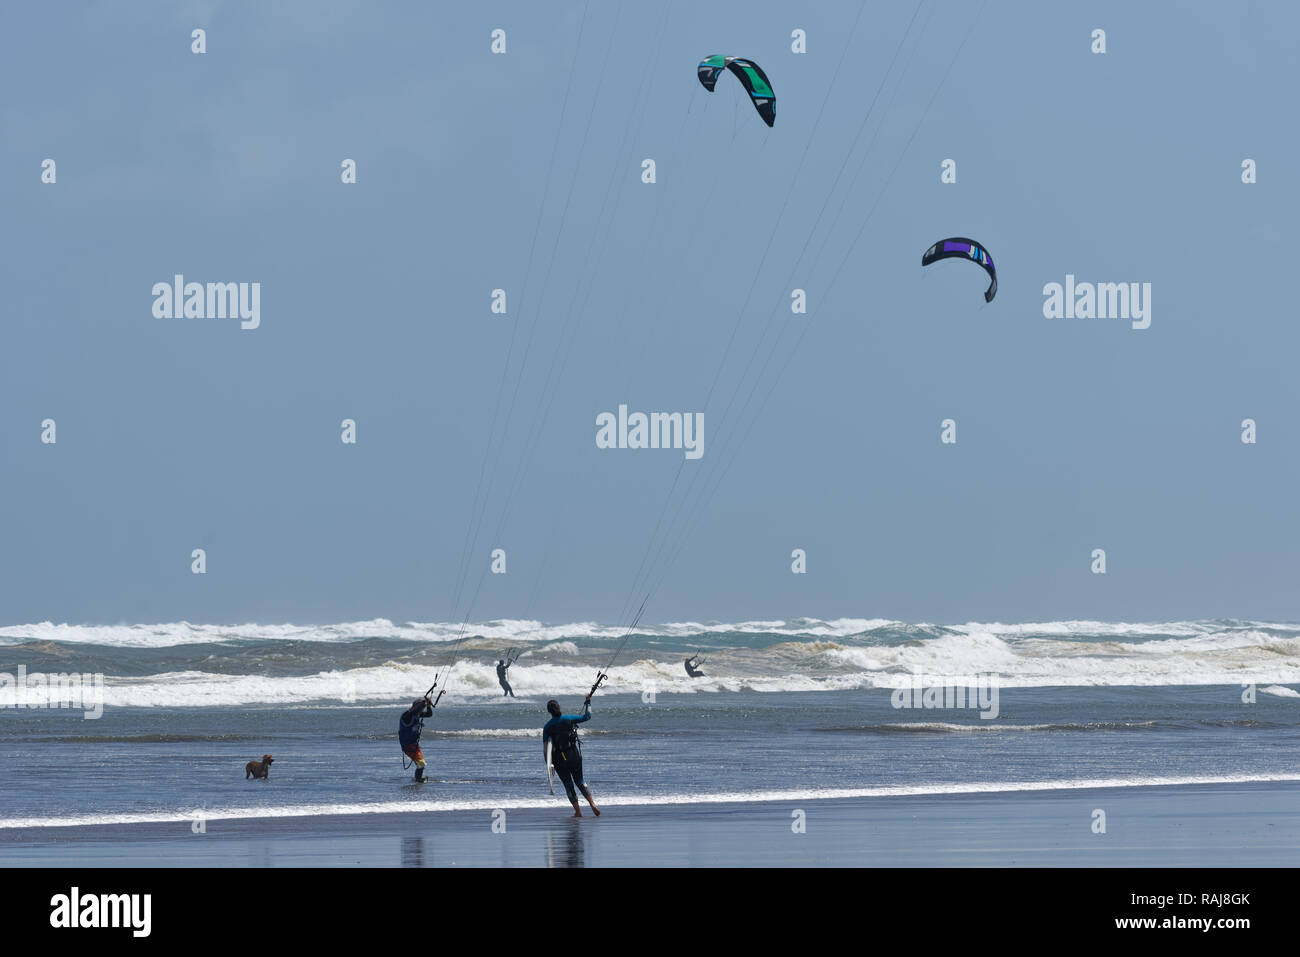 Kite surfers on the beach and in the water under clear skies on a windy day Stock Photo